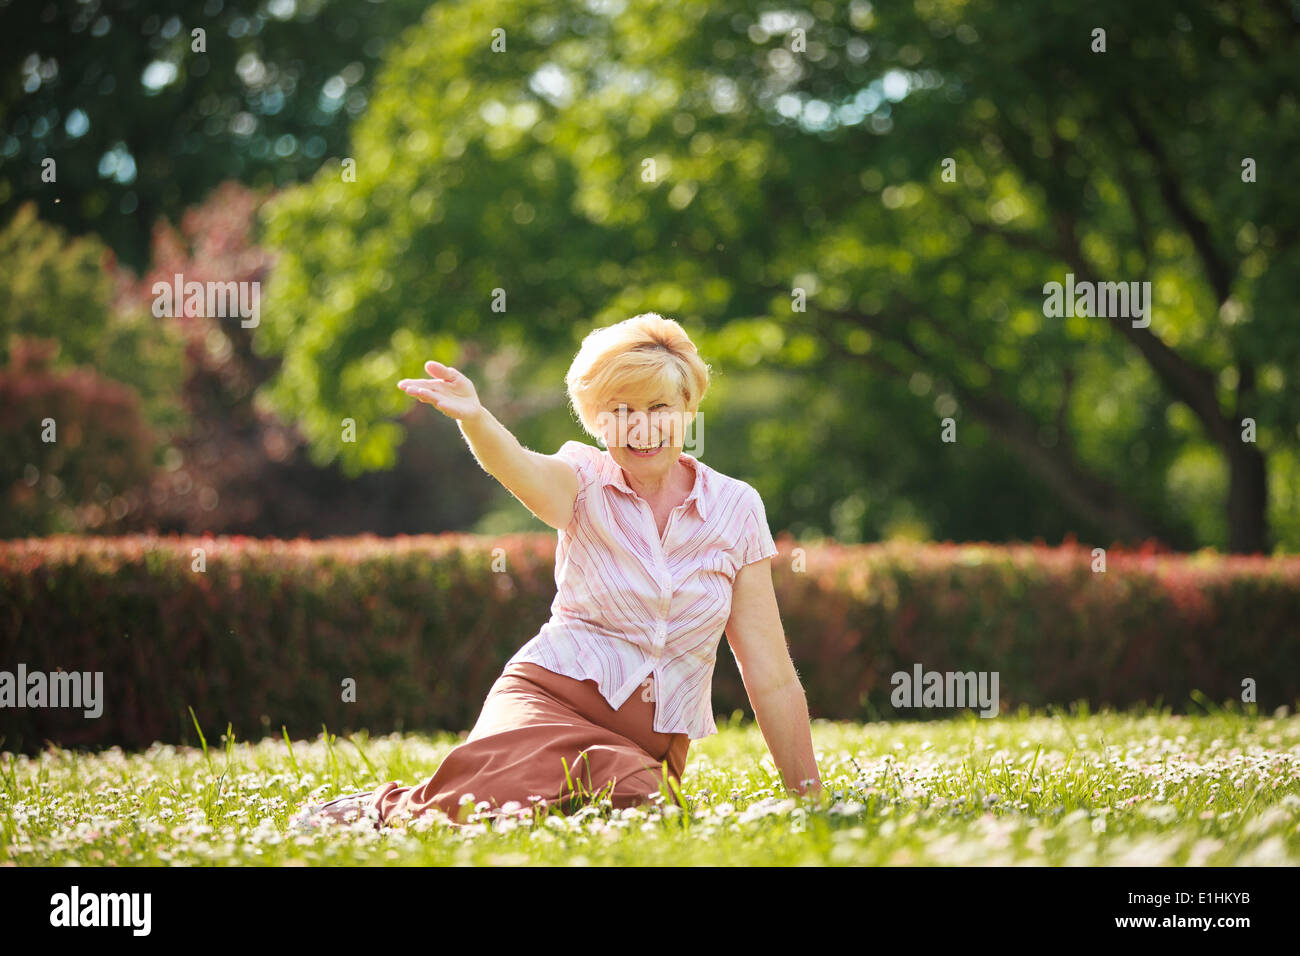 Enjoyment. Positive Emotions. Outgoing Old Woman Resting on Grass Stock Photo